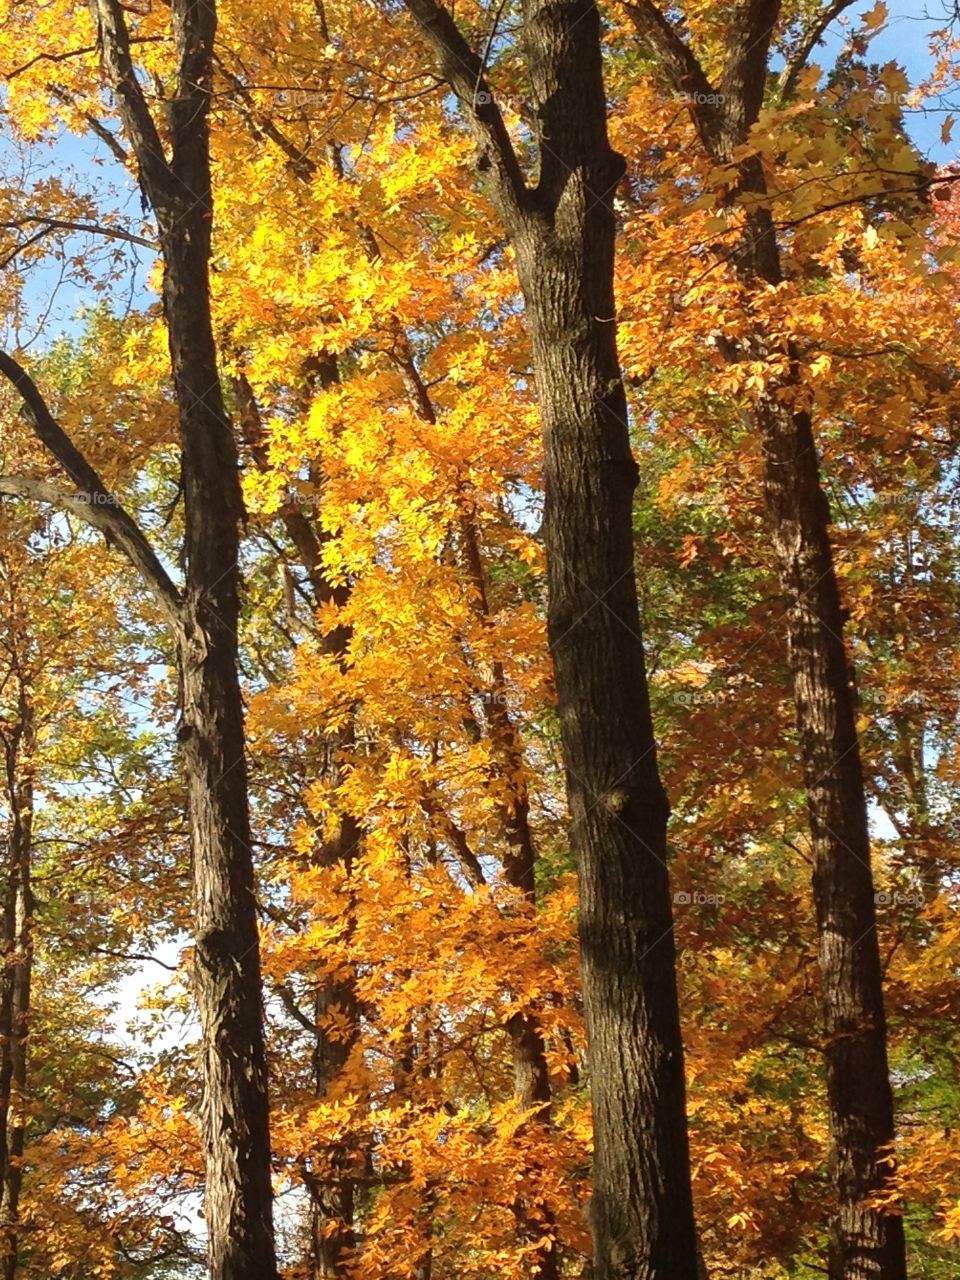 Golden leaves. Trees in the fall